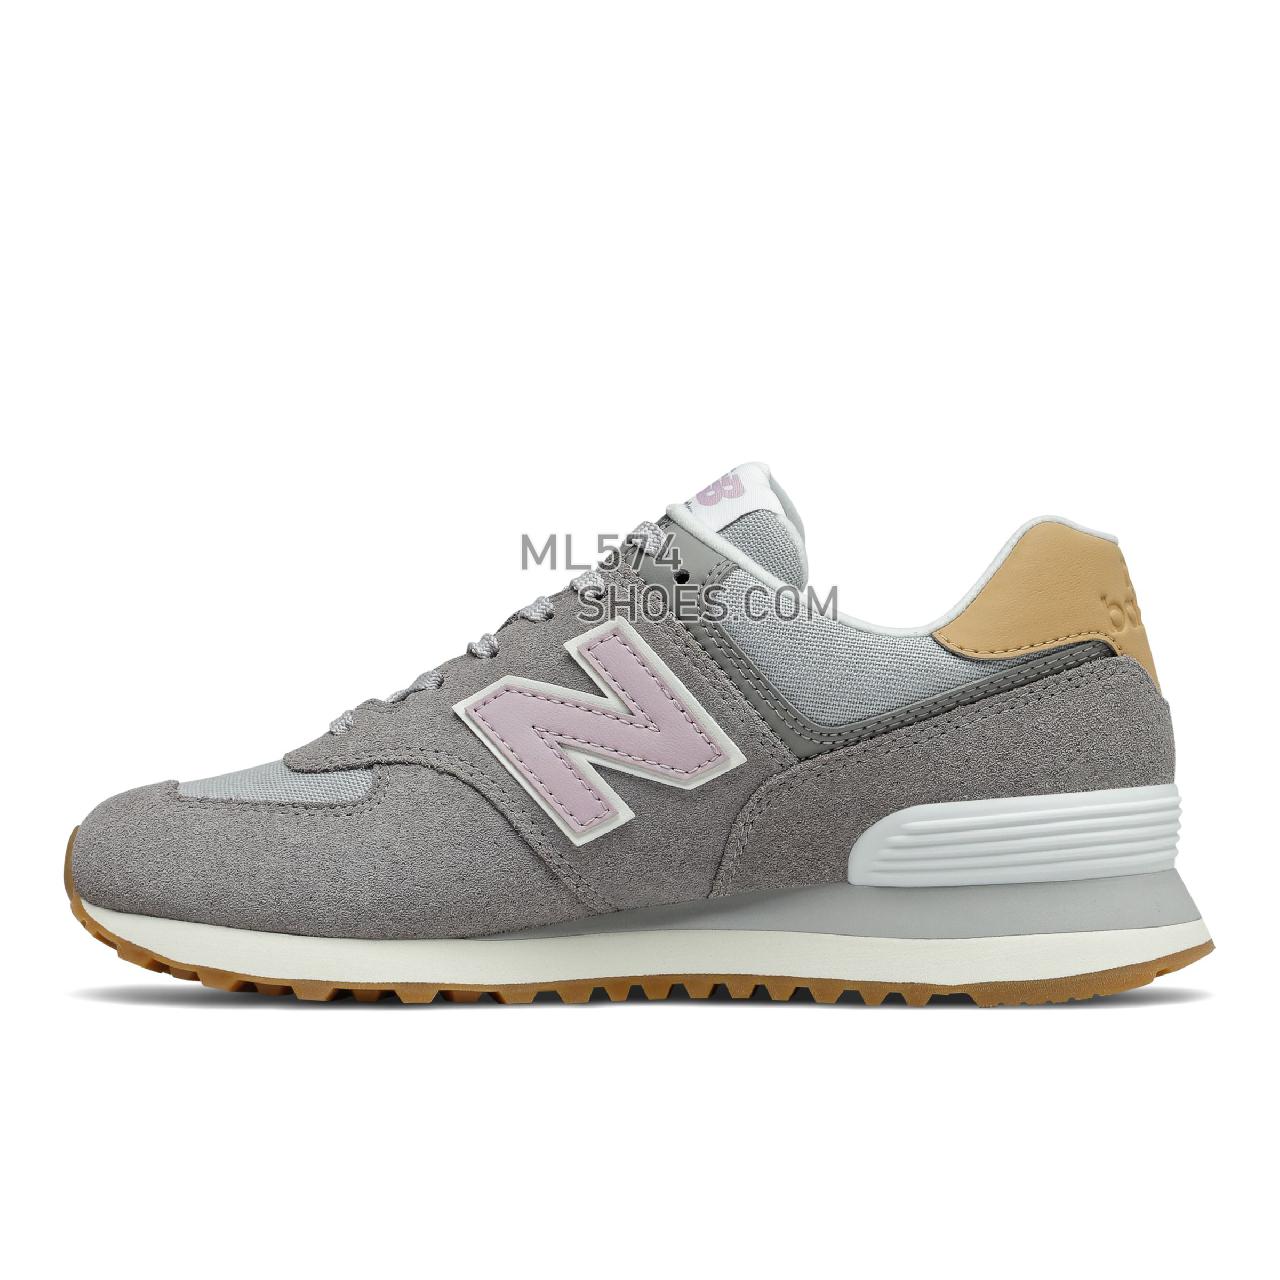 New Balance 574 - Women's Classic Sneakers - Steel with Rose Water - WL574NA2